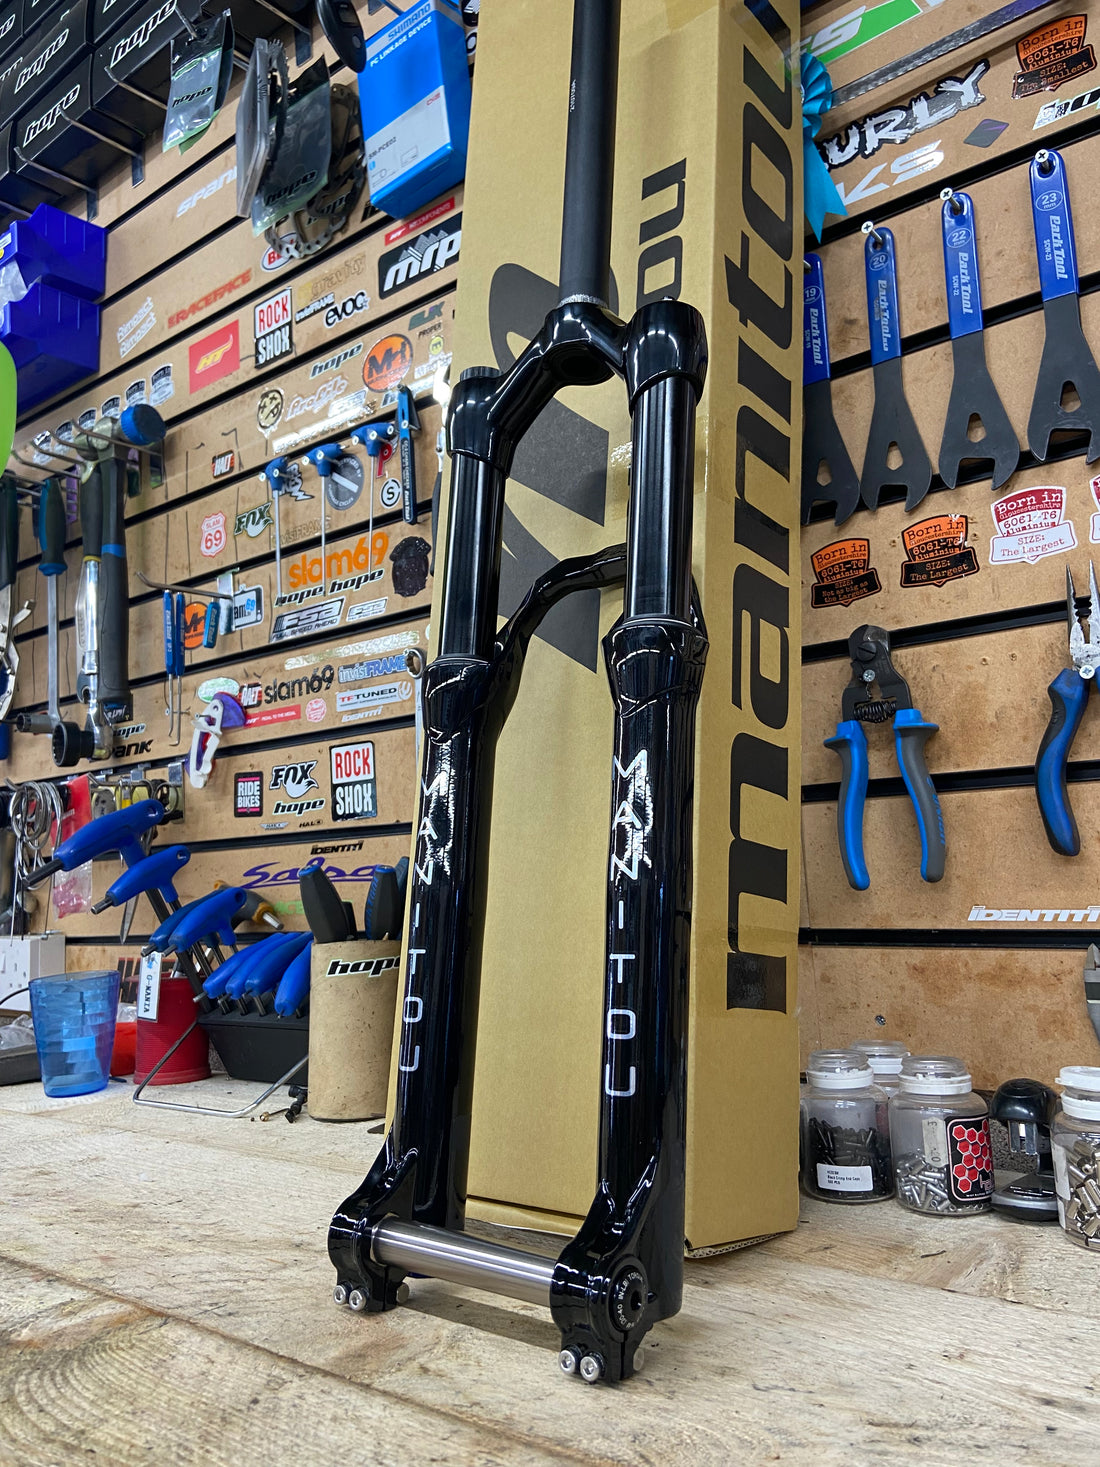 Calling all Dirt Jumpers! Manitou Circus Forks are back in stock!